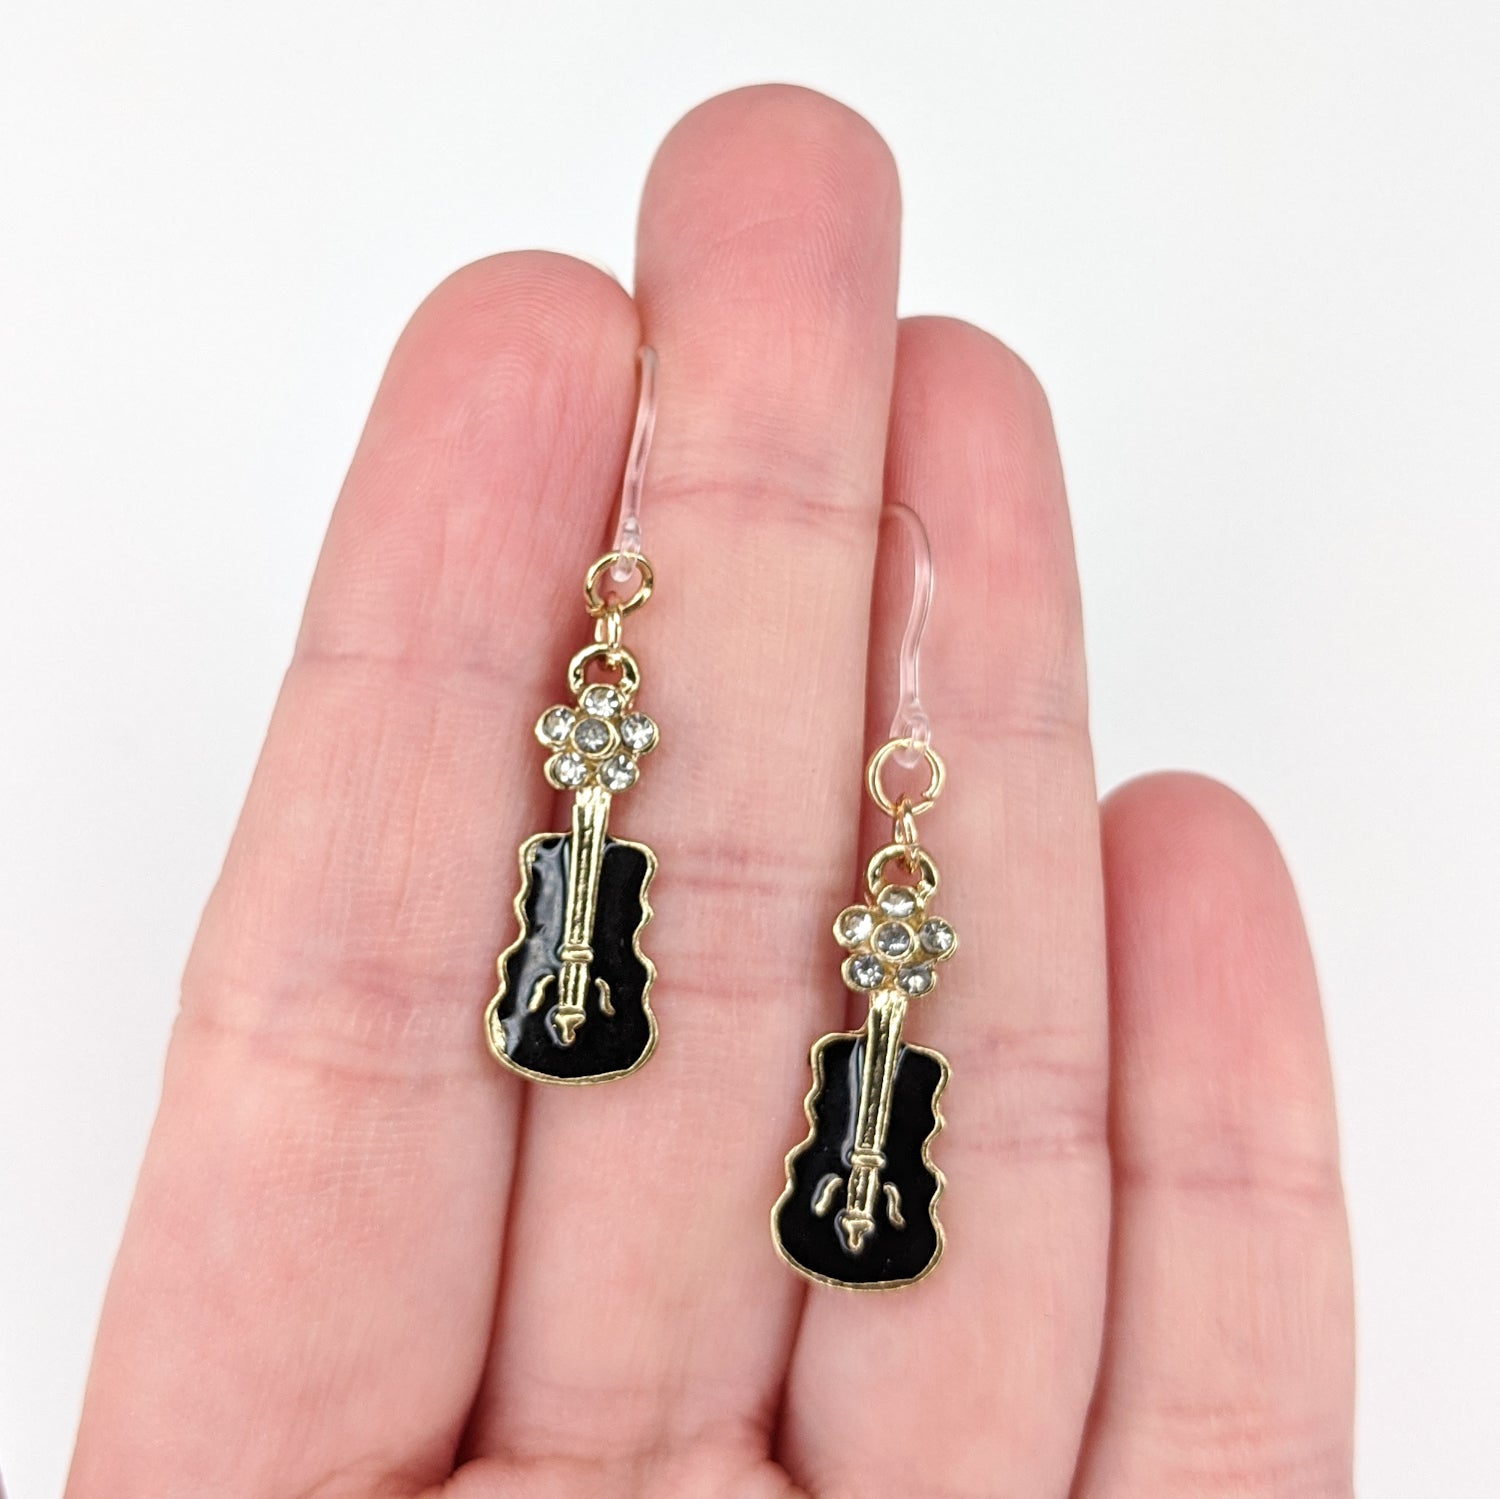 Jeweled Guitar Earrings (Dangles) - size comparison hand